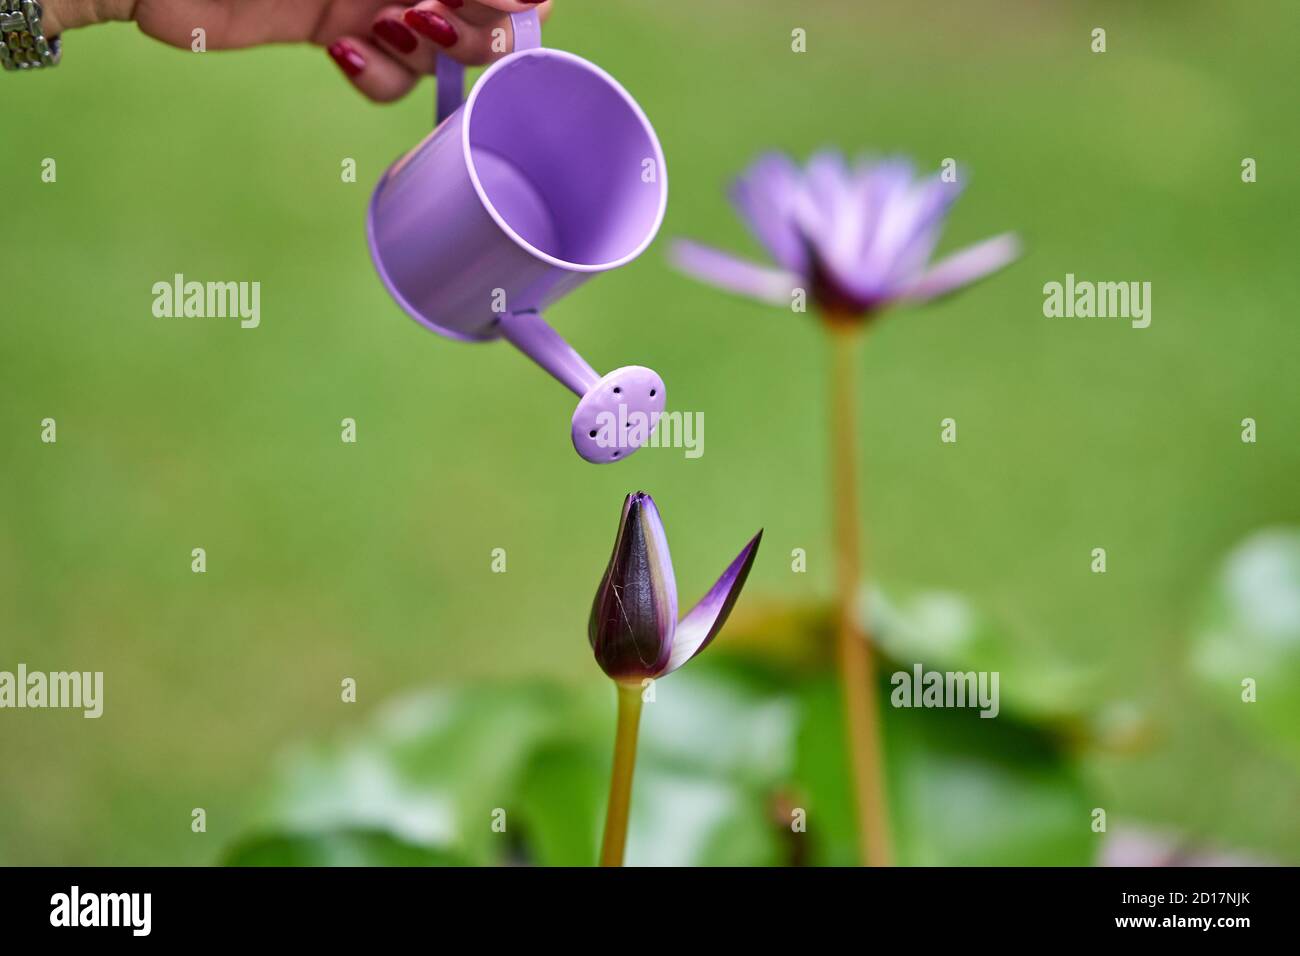 Miniature watering can and lotus flowers. Stock Photo